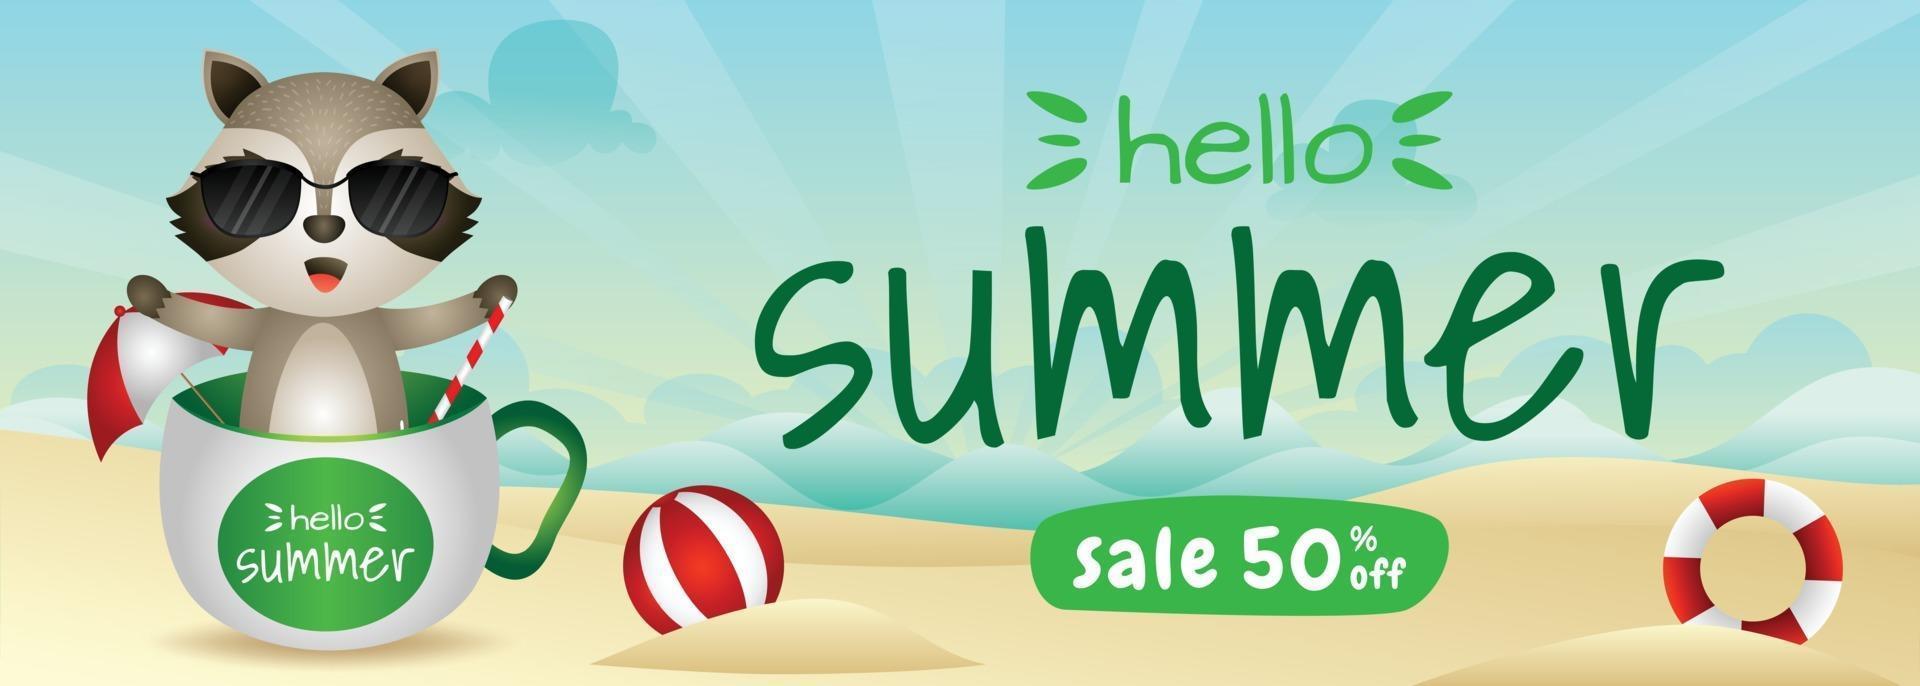 summer sale banner with a cute raccoon in the cup vector